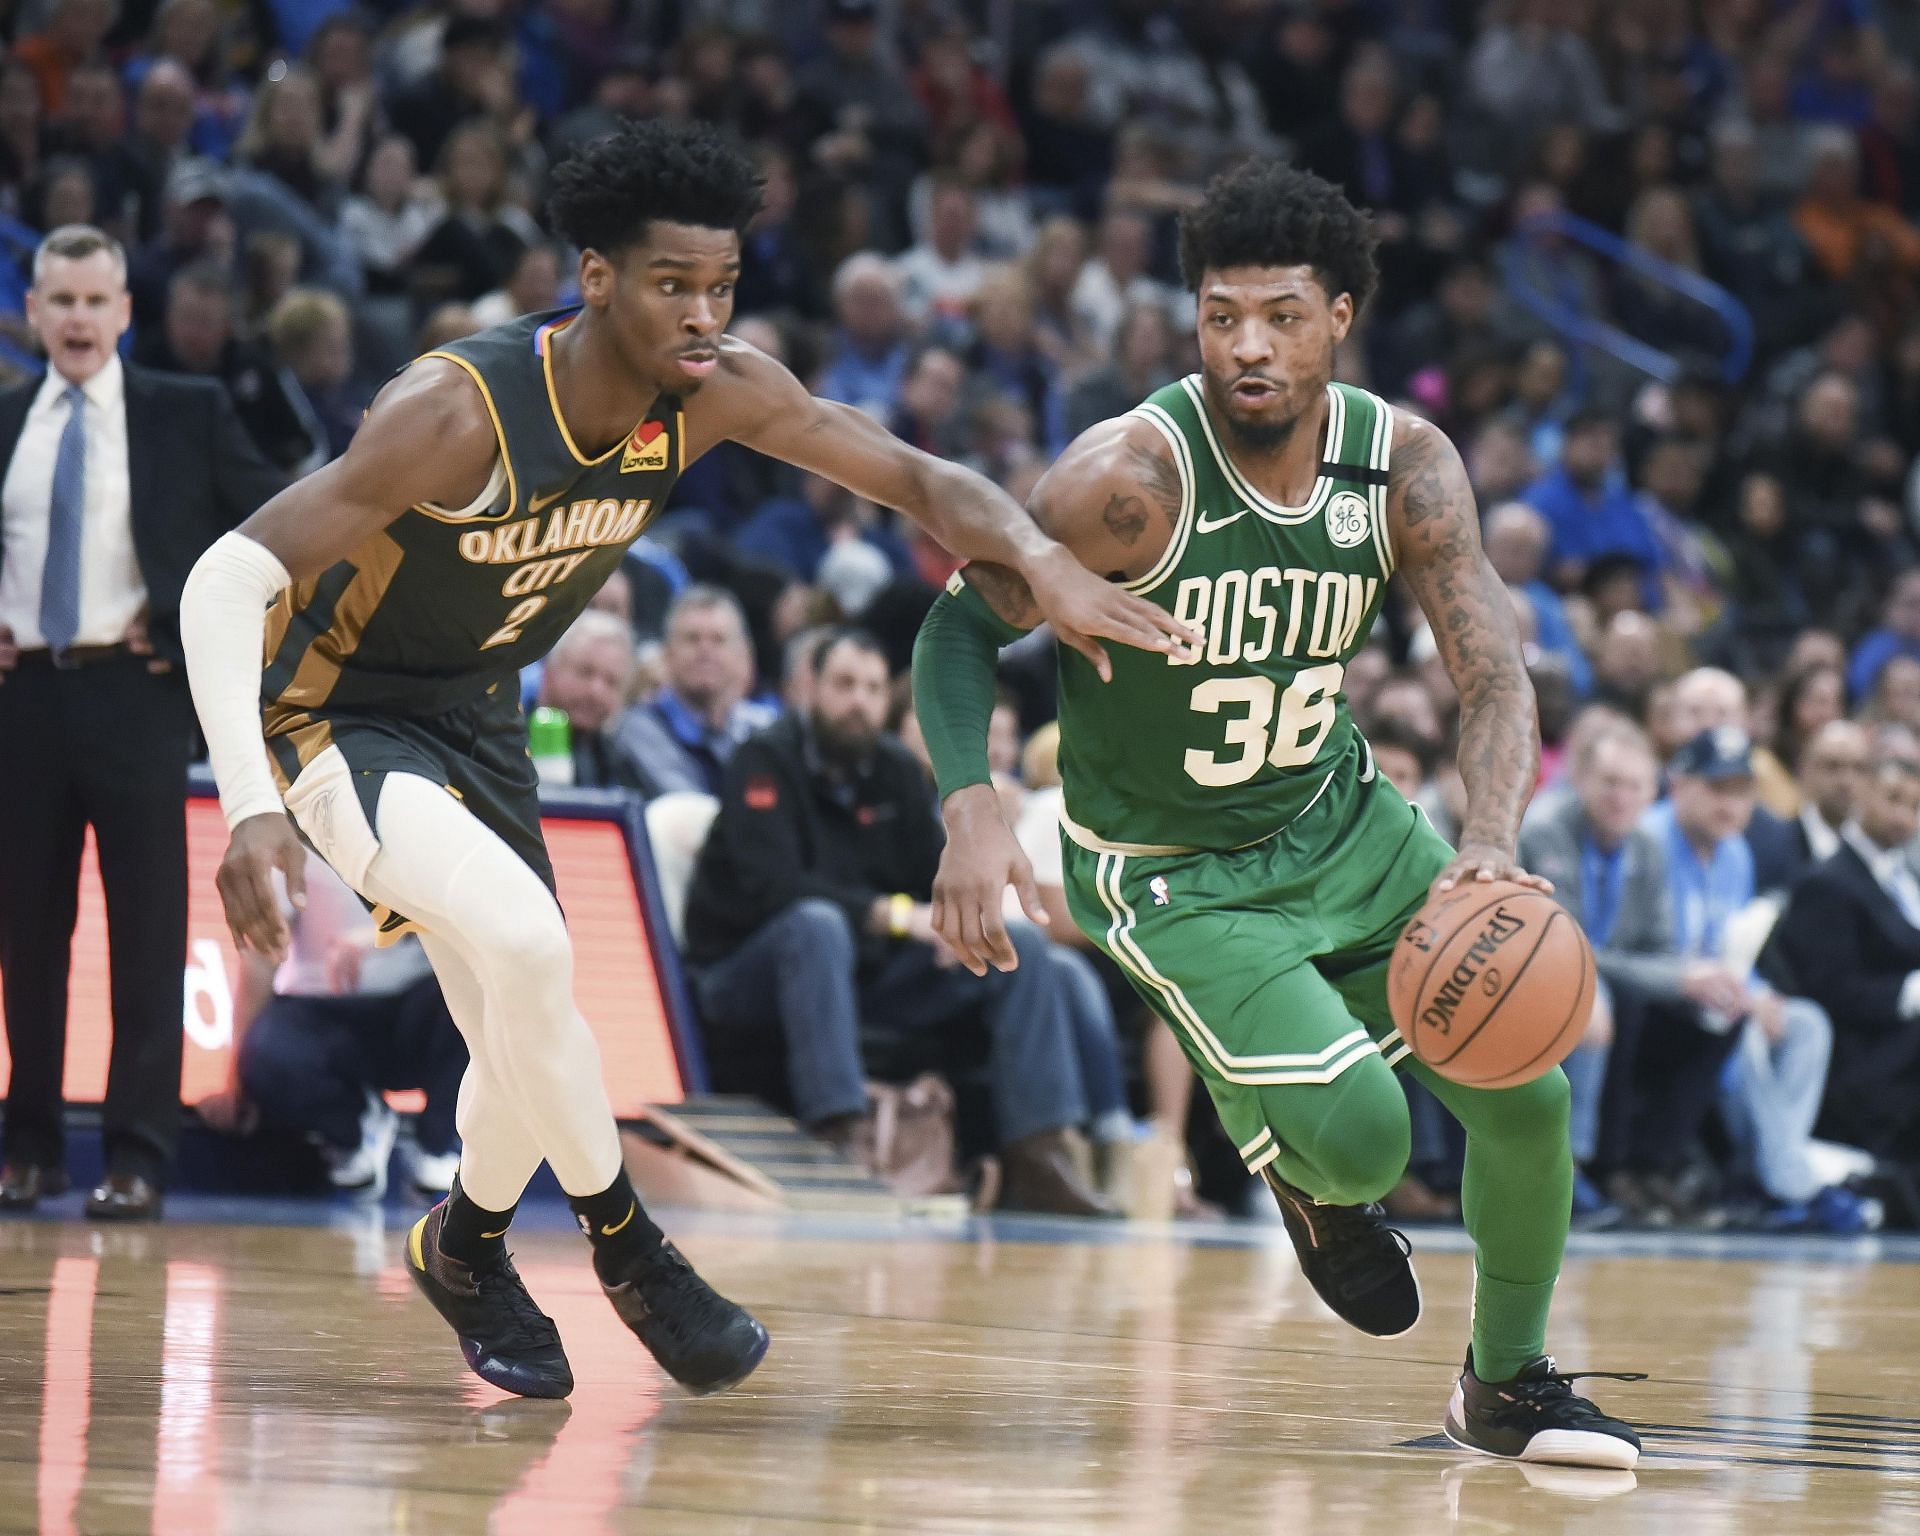 The Oklahoma City Thunder and the Boston Celtics will face eacth other for the first time this season on Saturday [Photo: The Spokesman-Review]